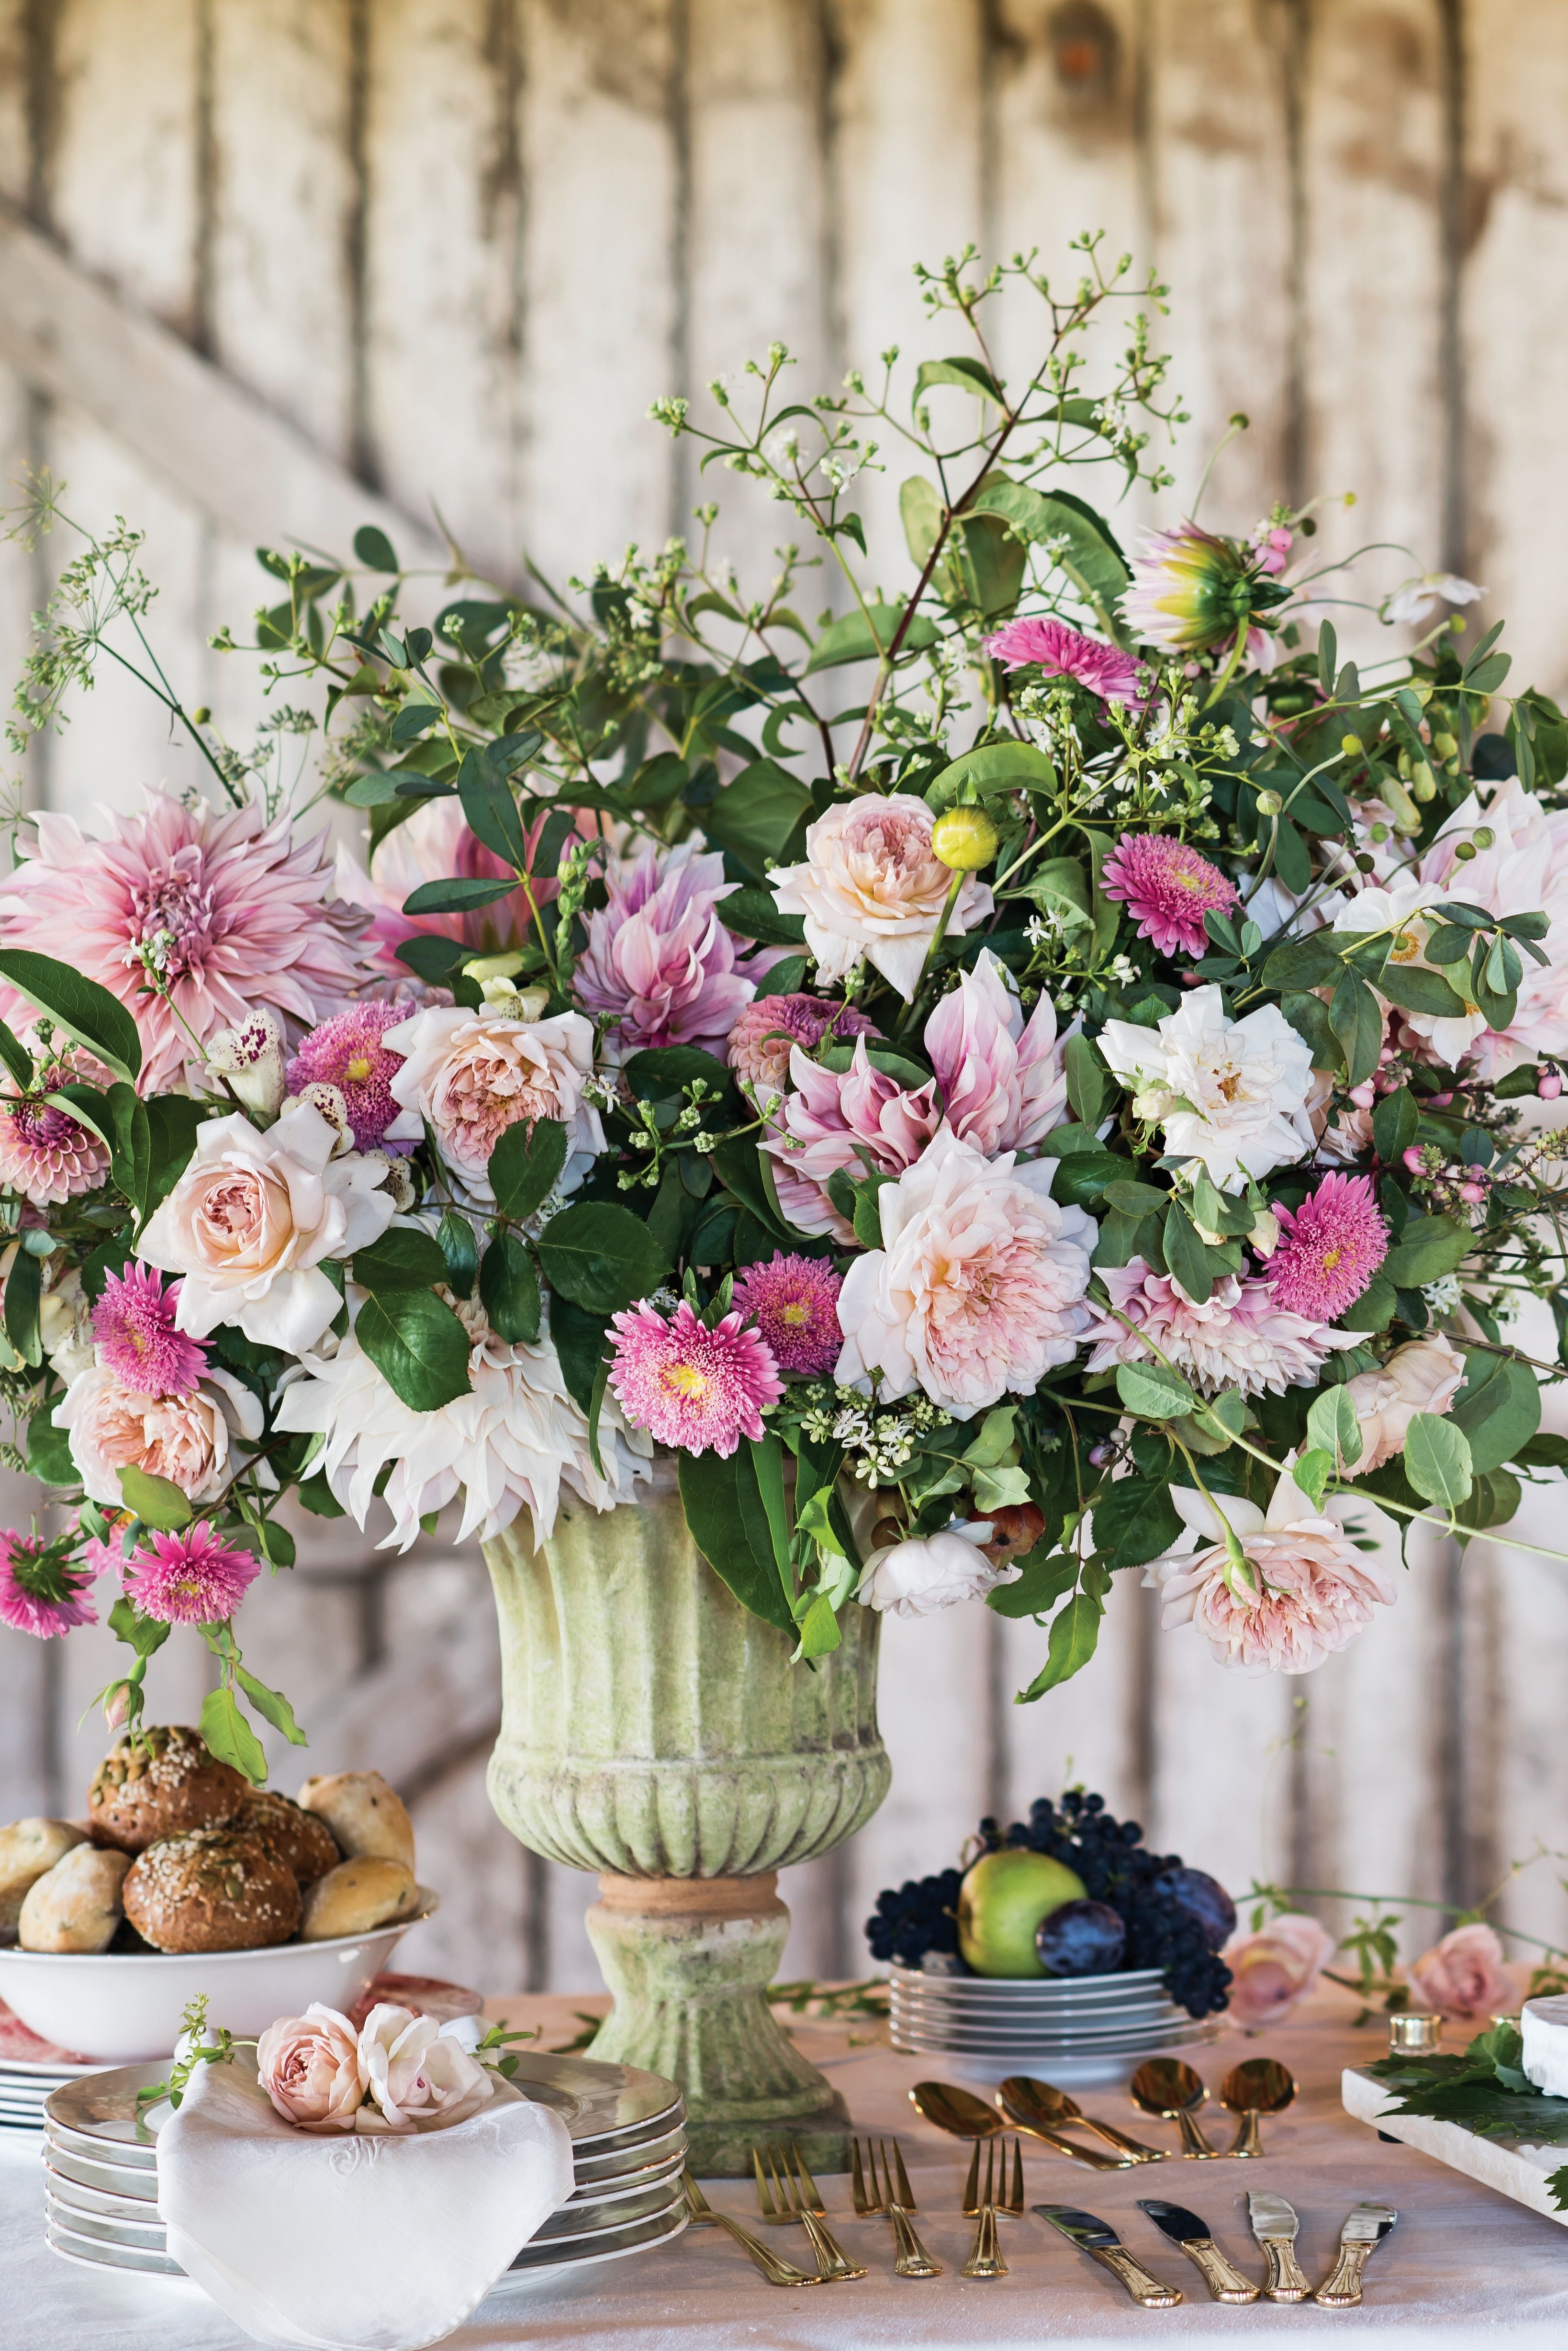 How to Make a Mixed Spring Bouquet. Beautiful